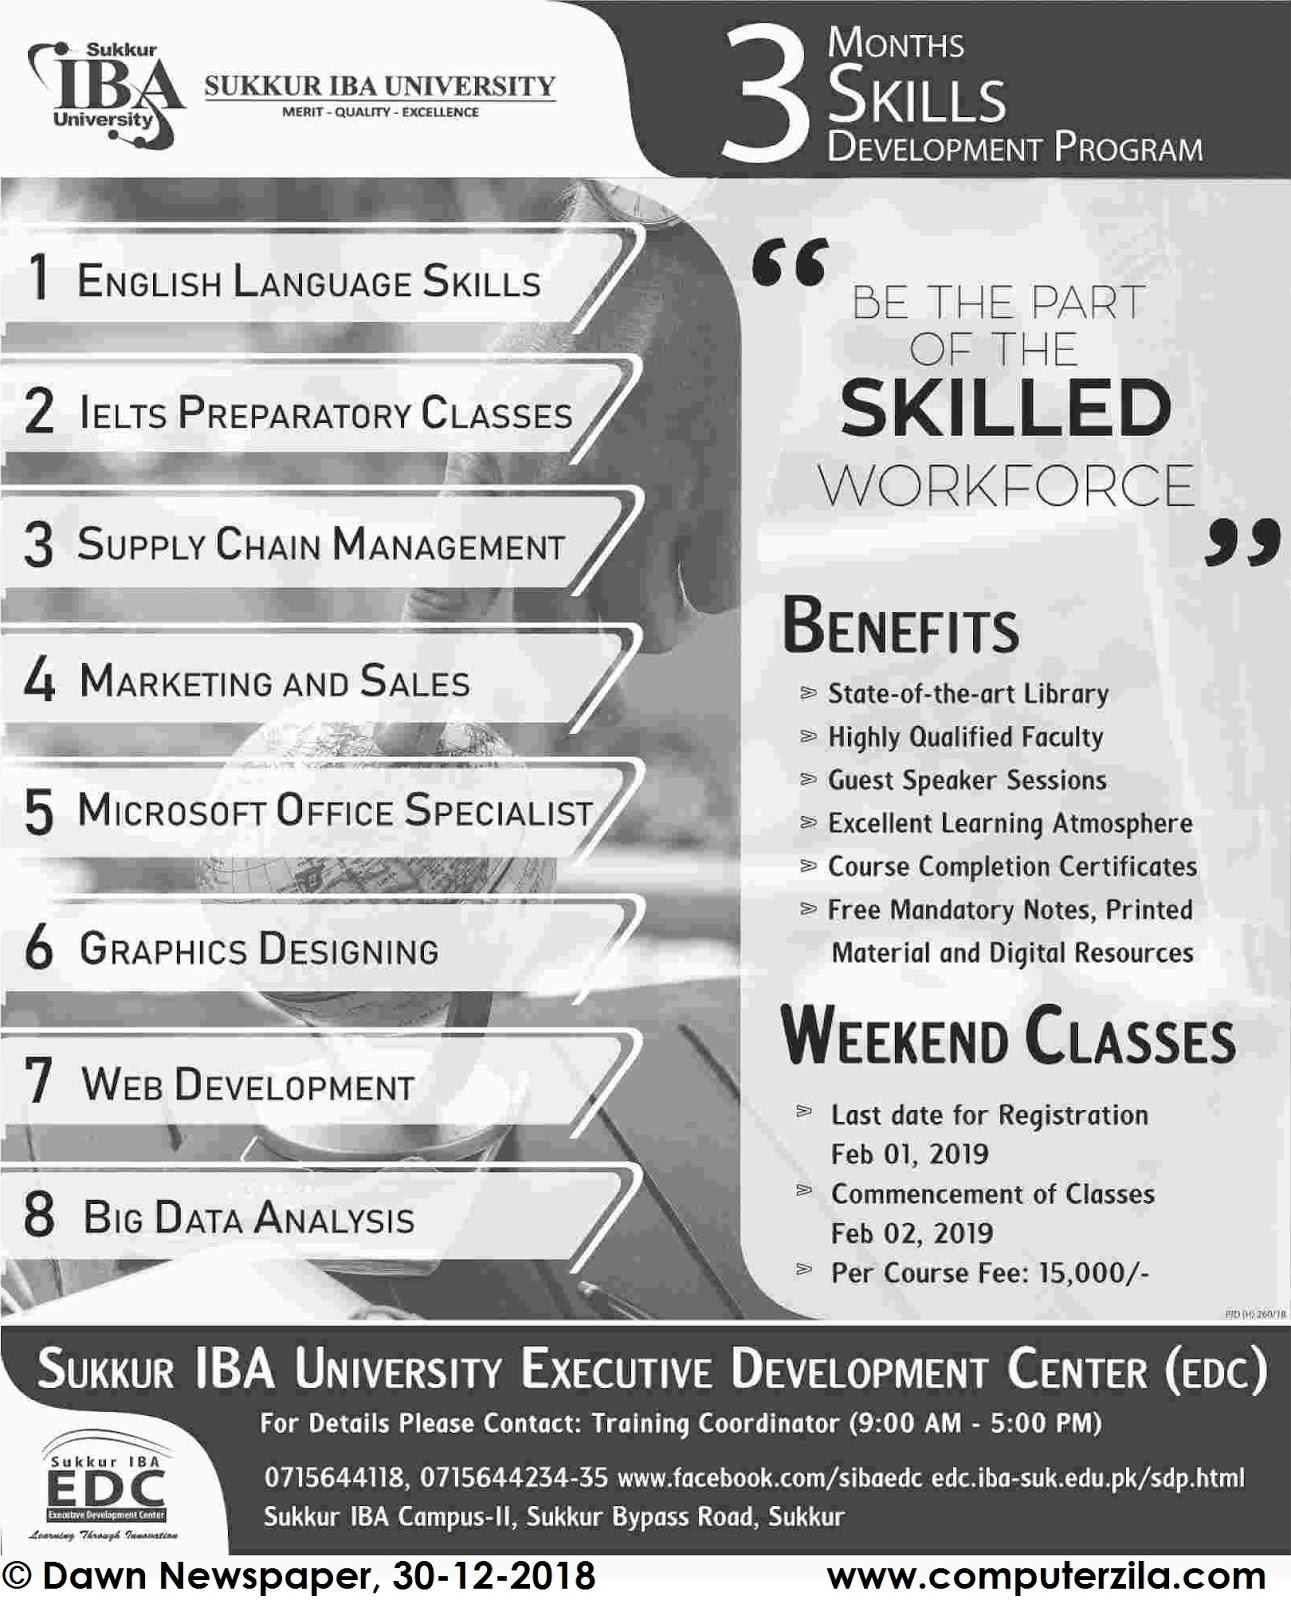 Admissions Open For Spring 2019 At SUKIBA Sukkur Campus